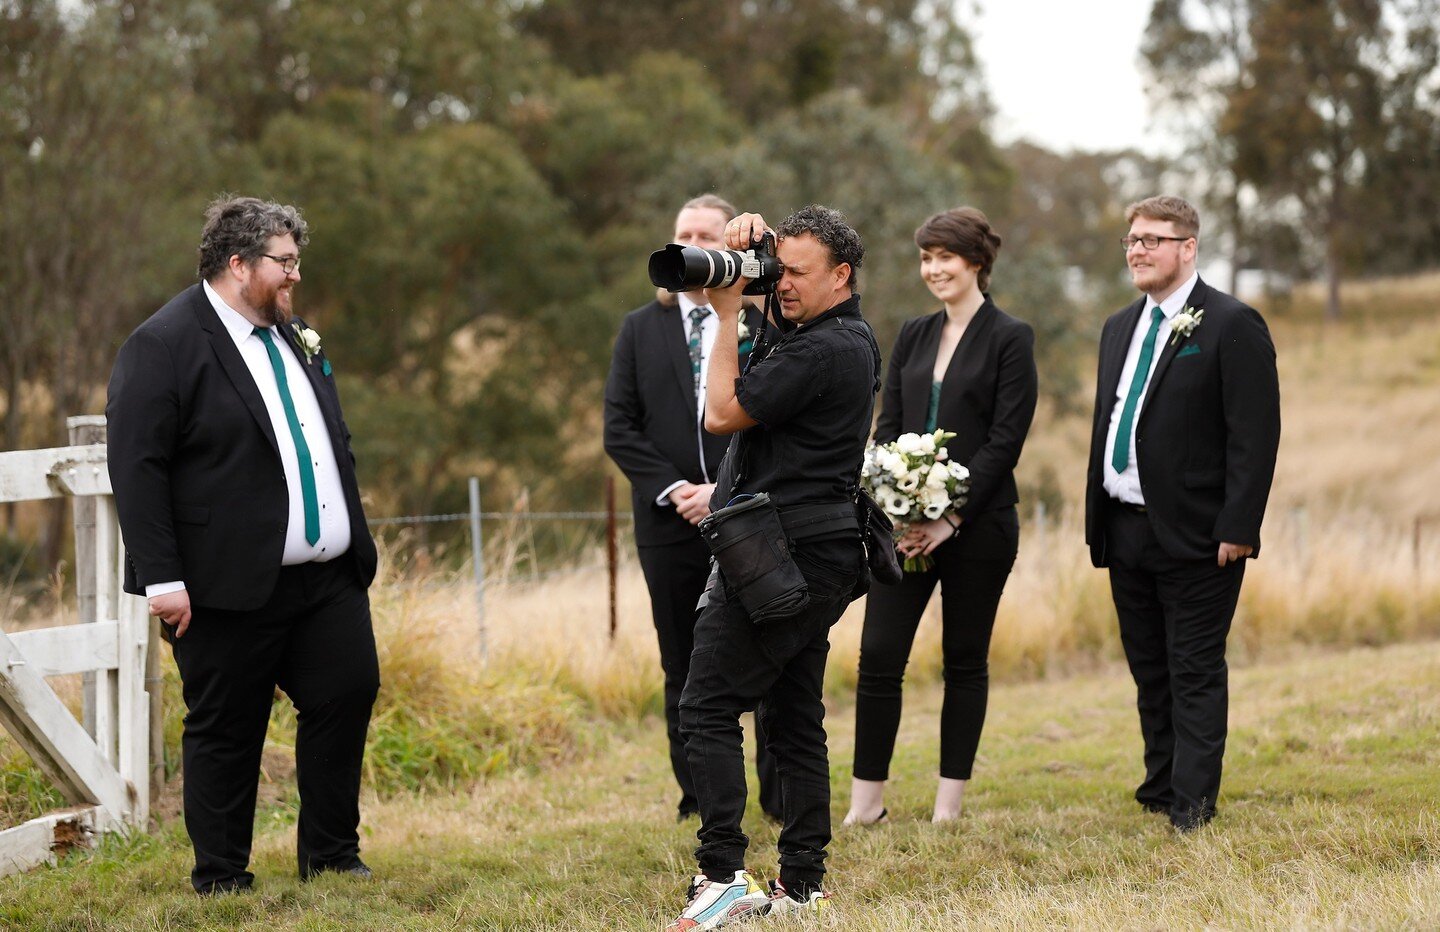 In action - thanks Tarj 

If anyone finds my harness, would love it back lol

#huntervalleyweddingphotographer #huntervalleywedding